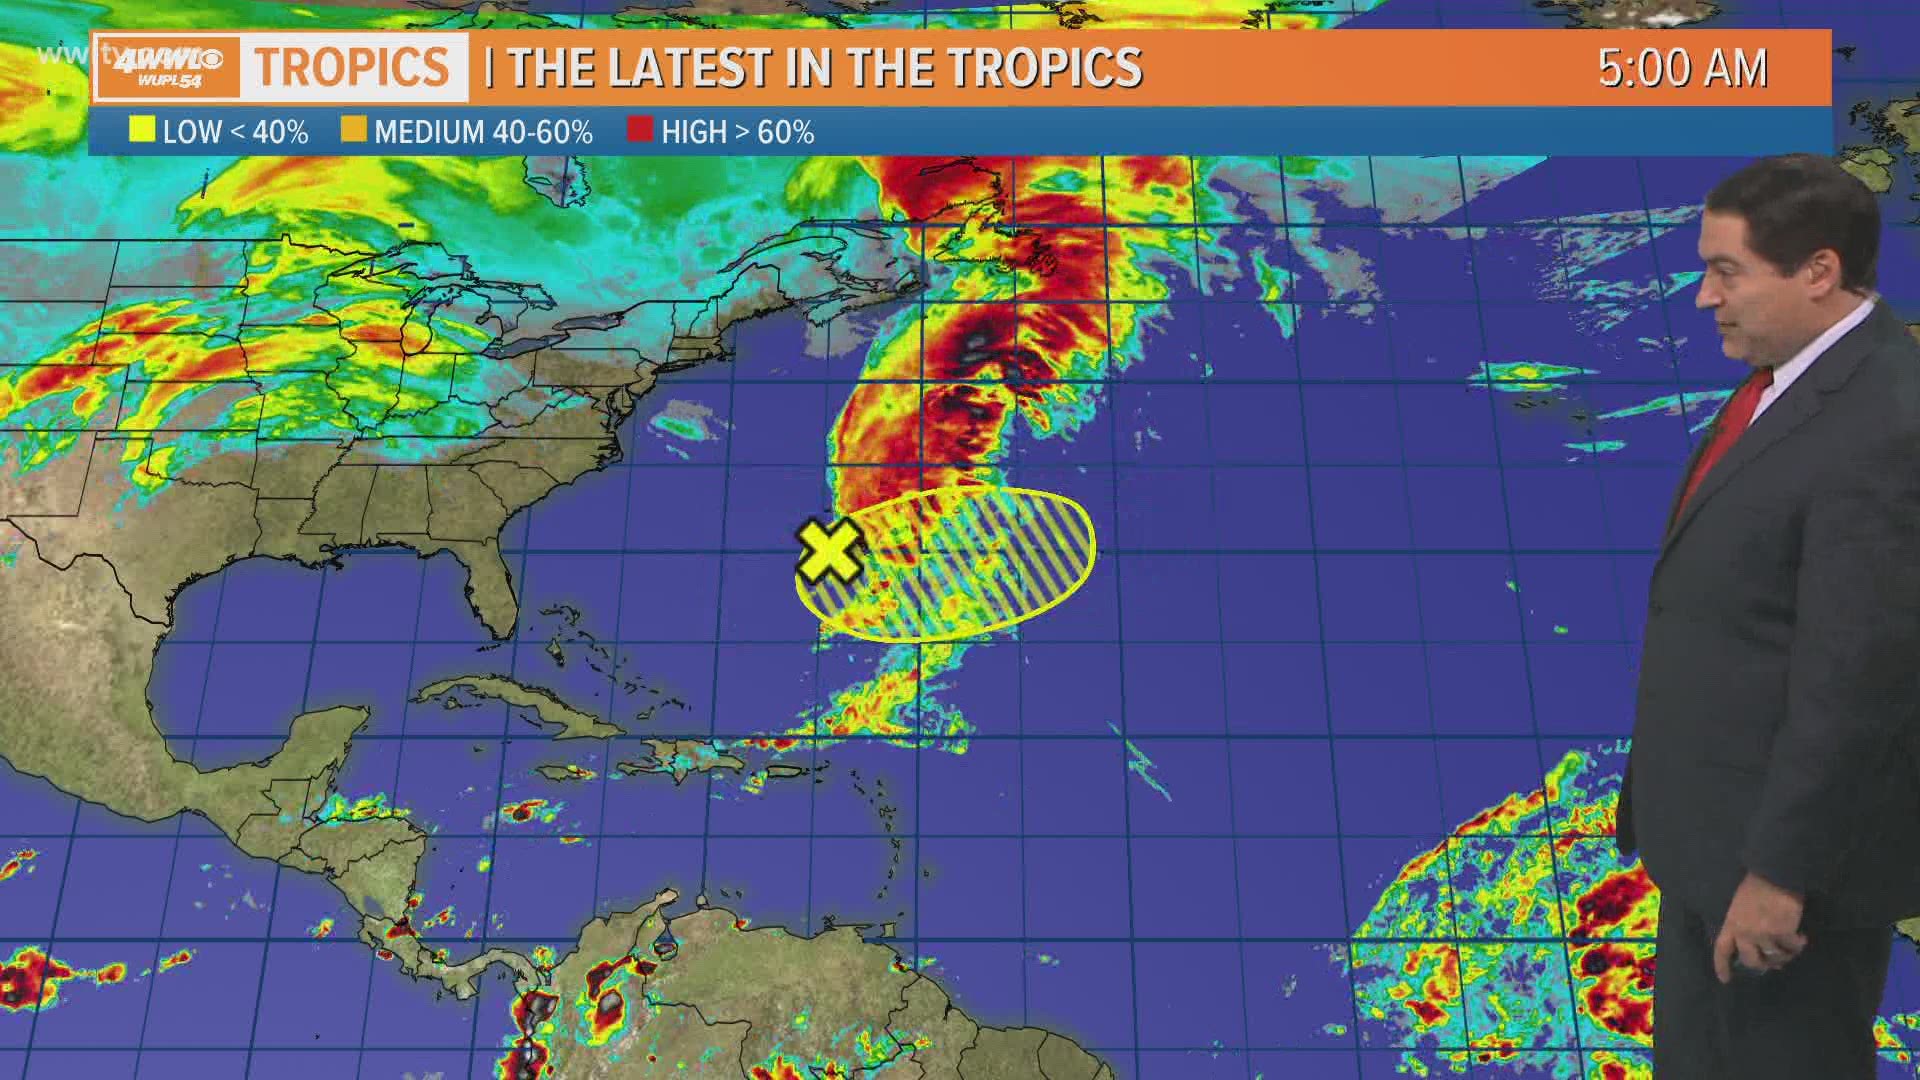 There is one area in the western Atlantic that has a low chance to develop this week